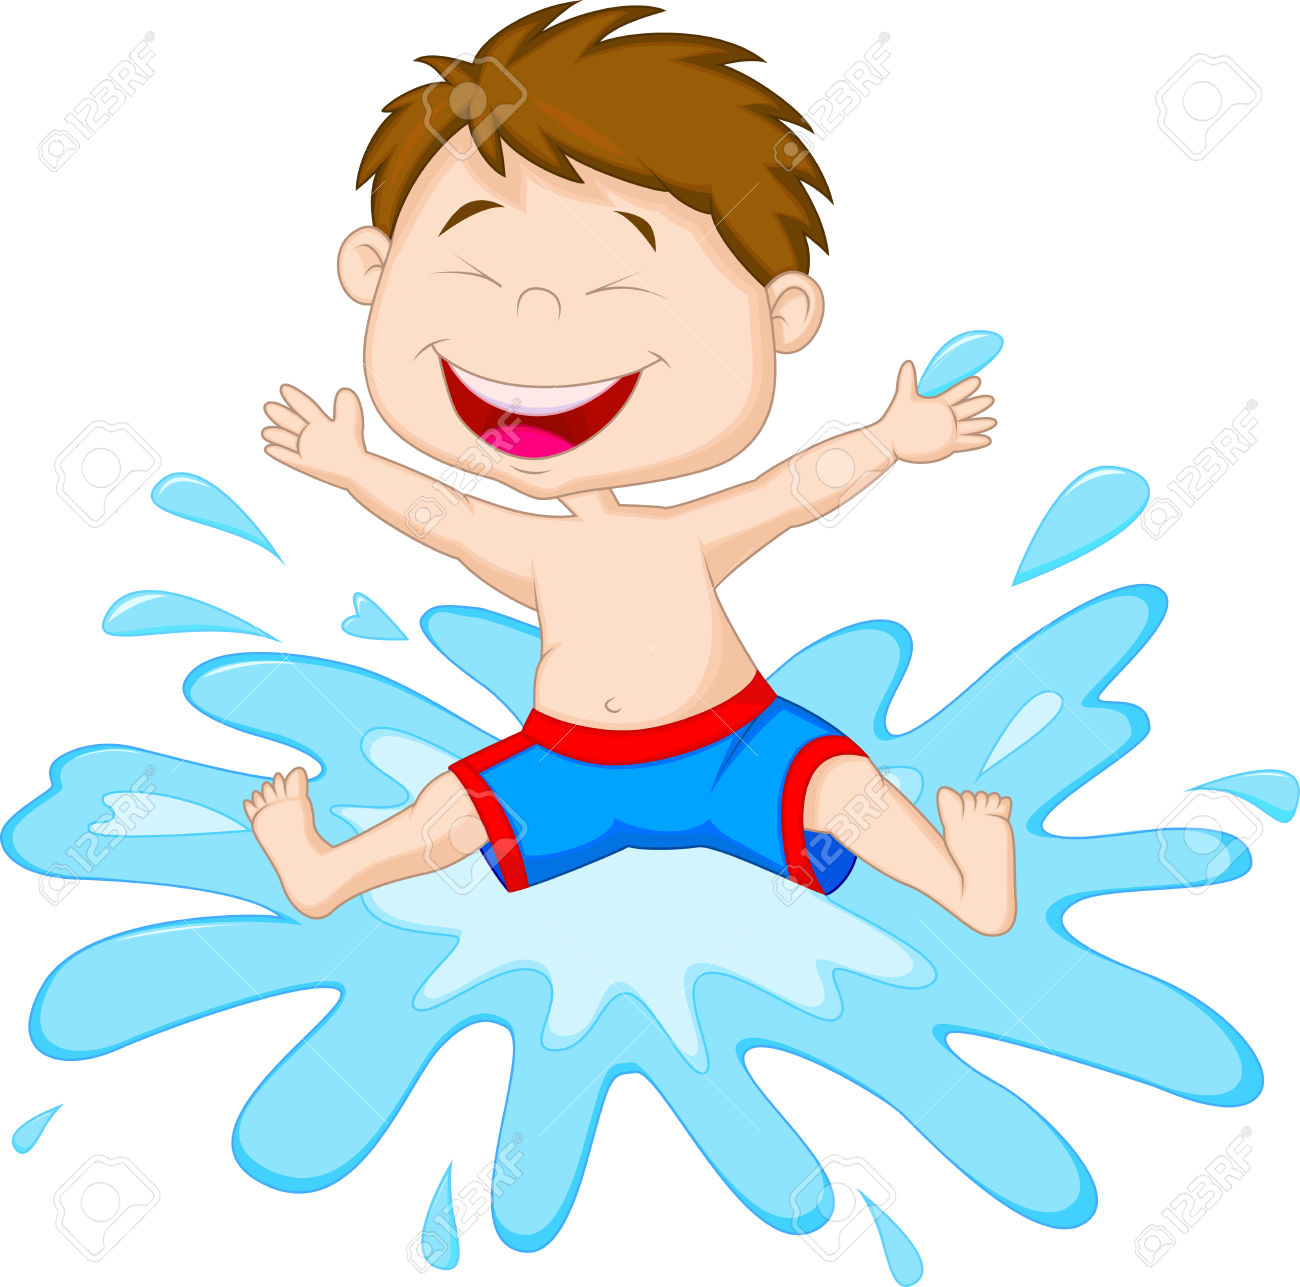 Wet clipart wet kid. Collection of free download